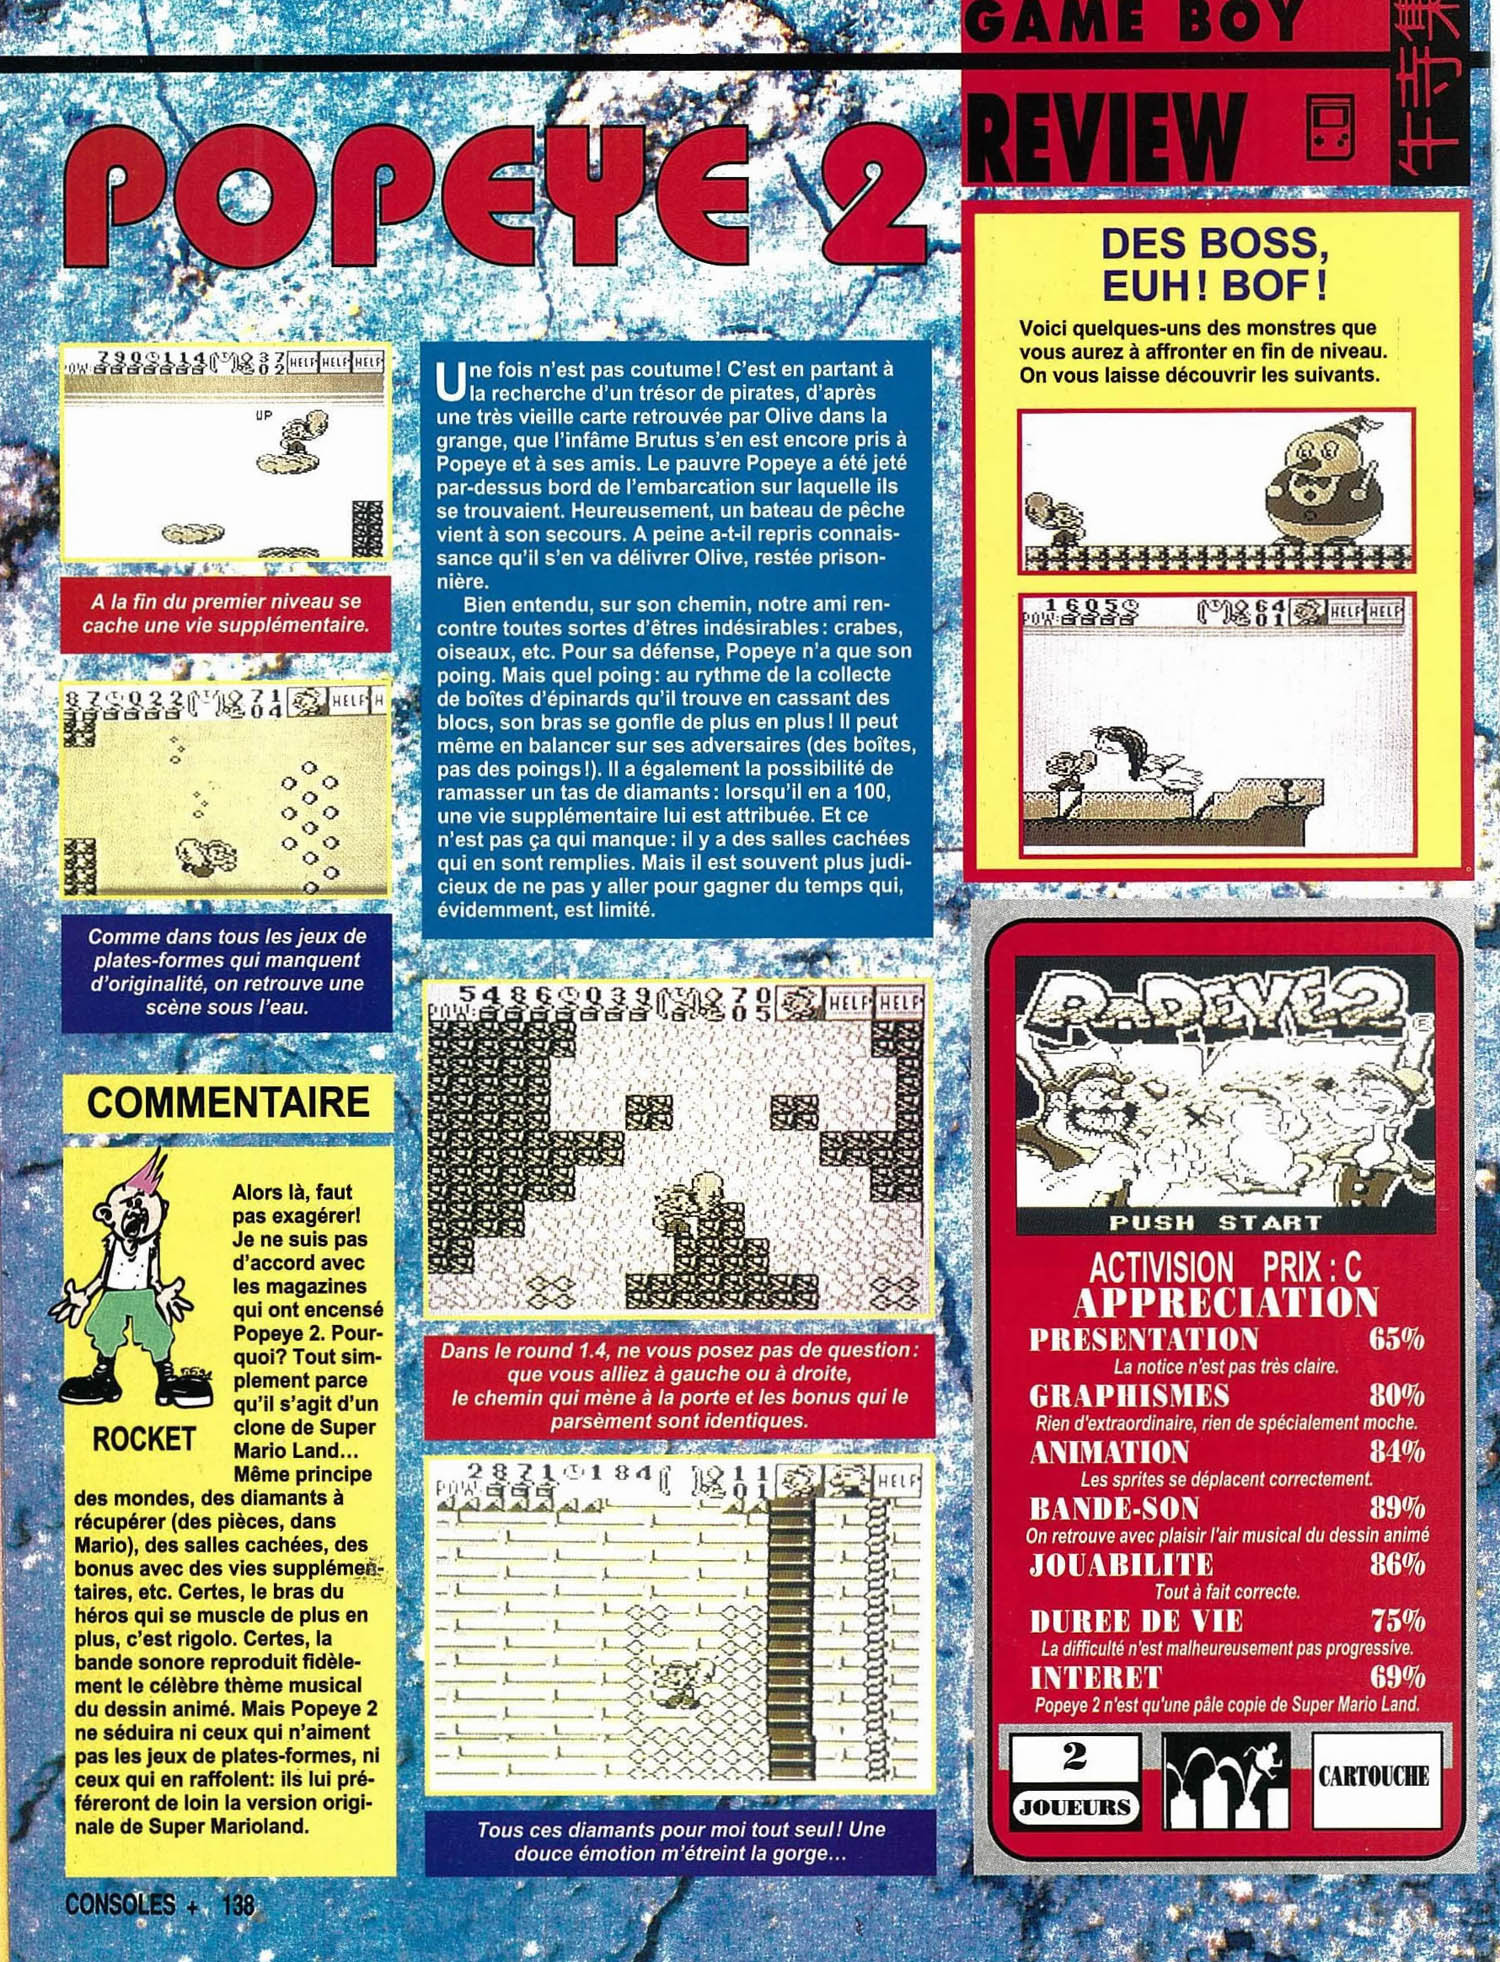 tests//1093/Consoles + 020 - Page 138 (mai 1993).jpg